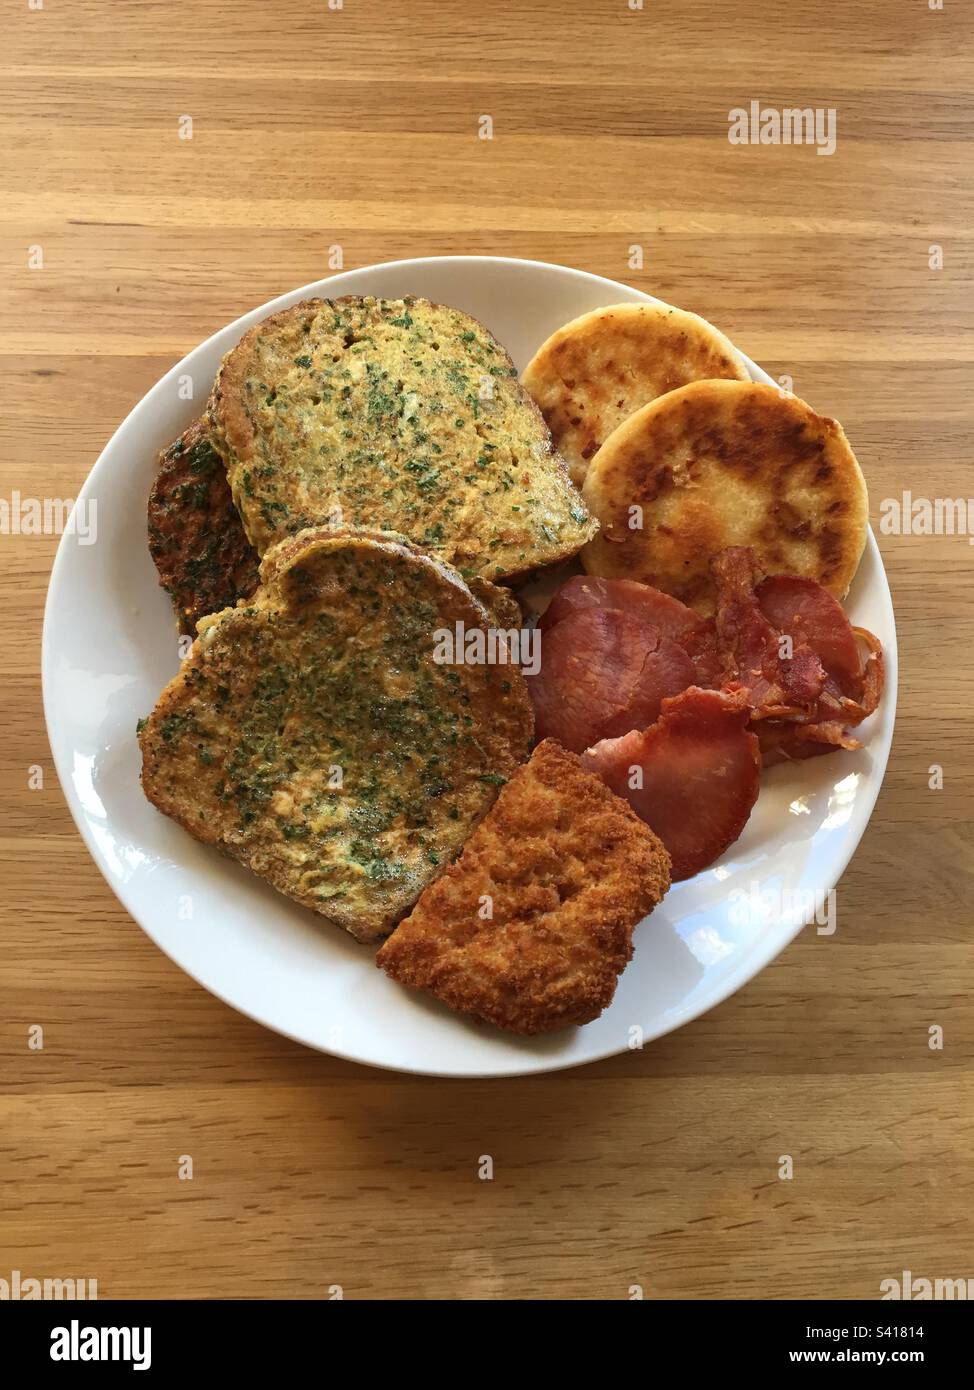 Lunch fry up with eggy bread, crispy bacon, chicken in breadcrumbs and potato cakes, pic 6. Stock Photo